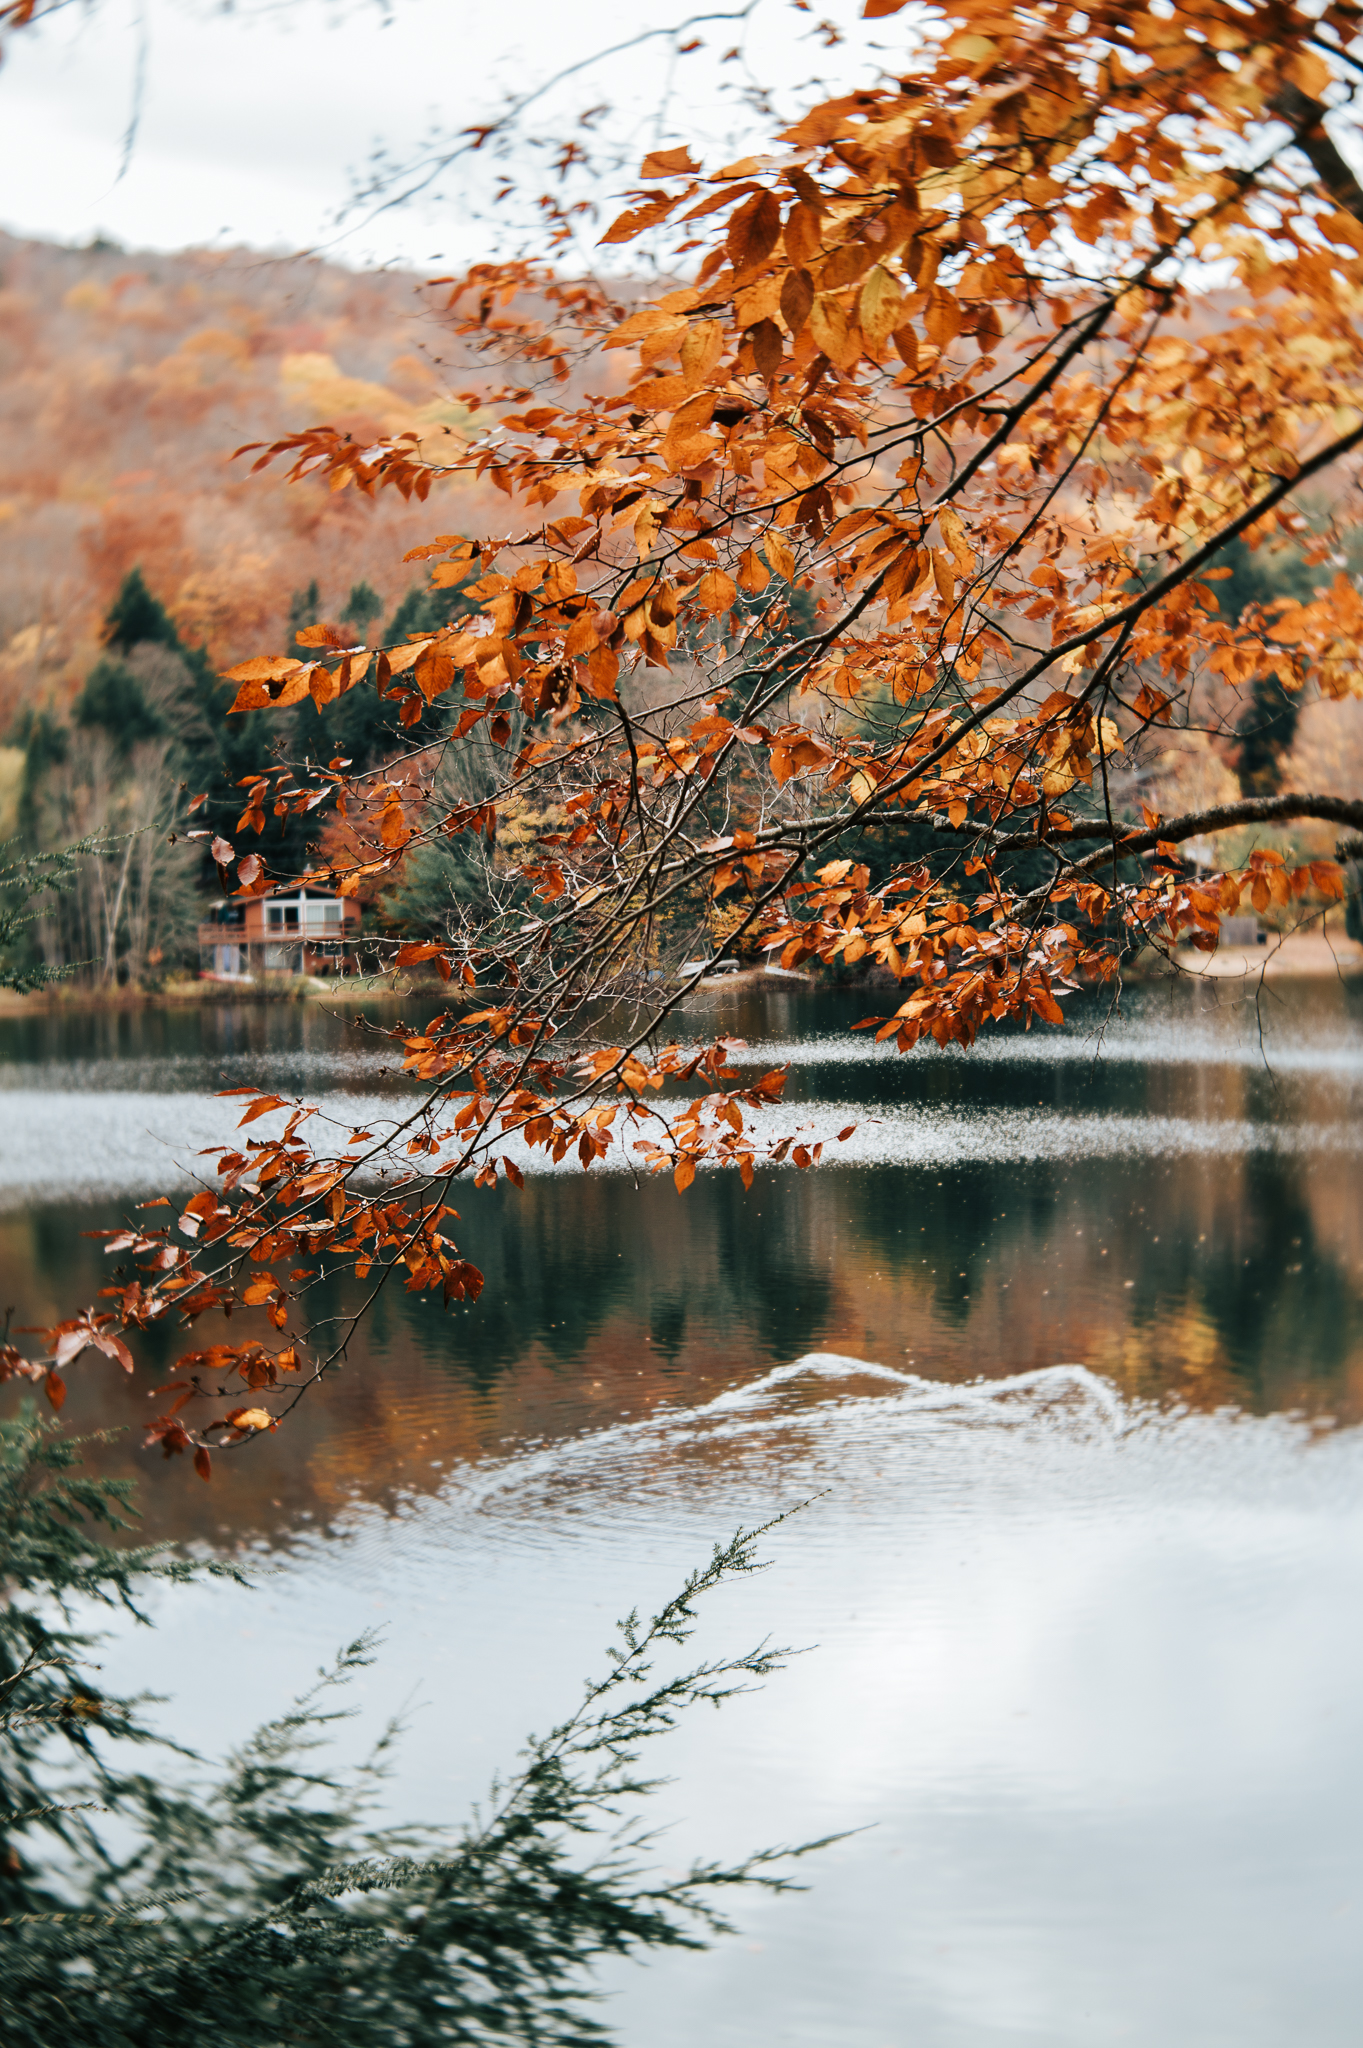 Professional photograph of a branch with orange autumn leaves above a glassy lake with fall foliage reflecting in it. This picture is taken near Boston.